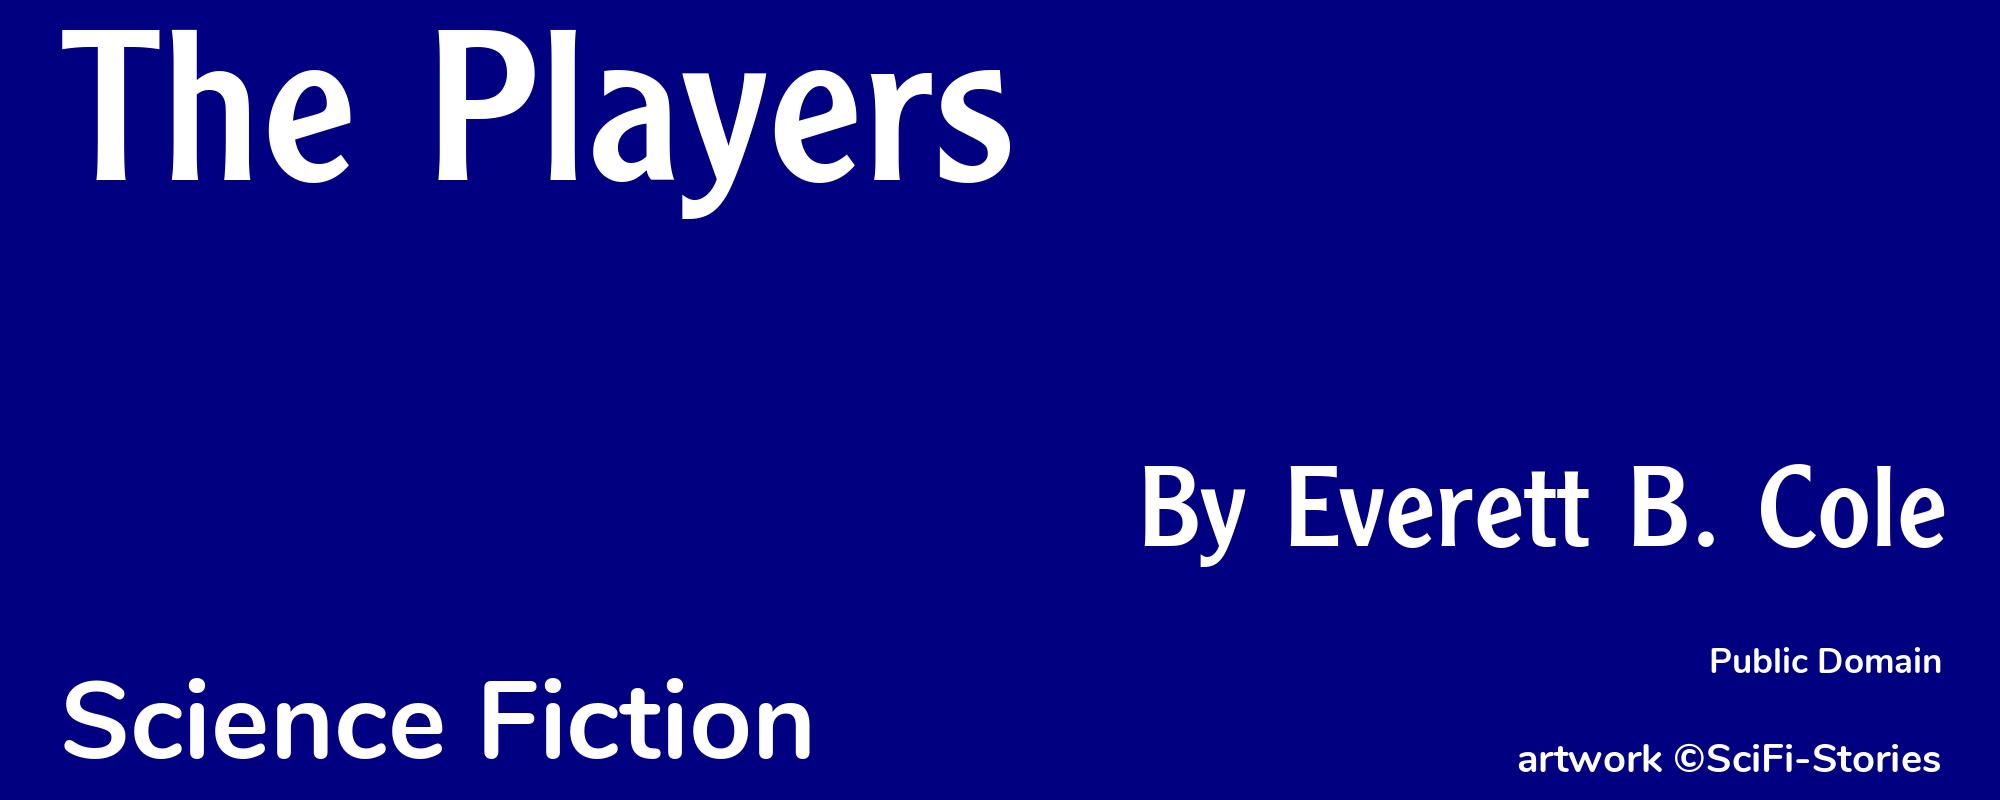 The Players - Cover